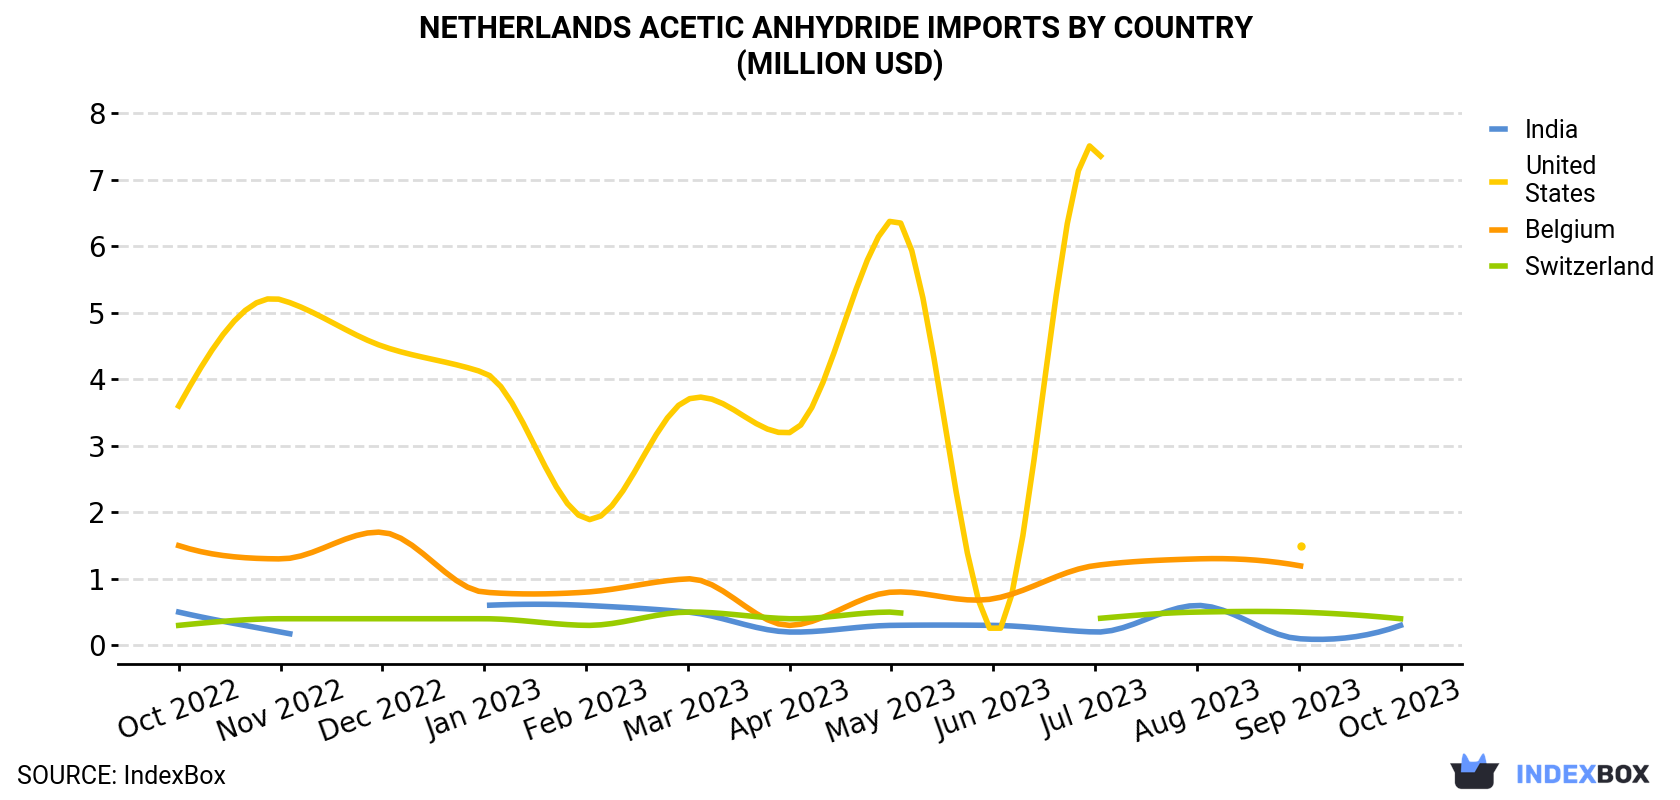 Netherlands Acetic Anhydride Imports By Country (Million USD)